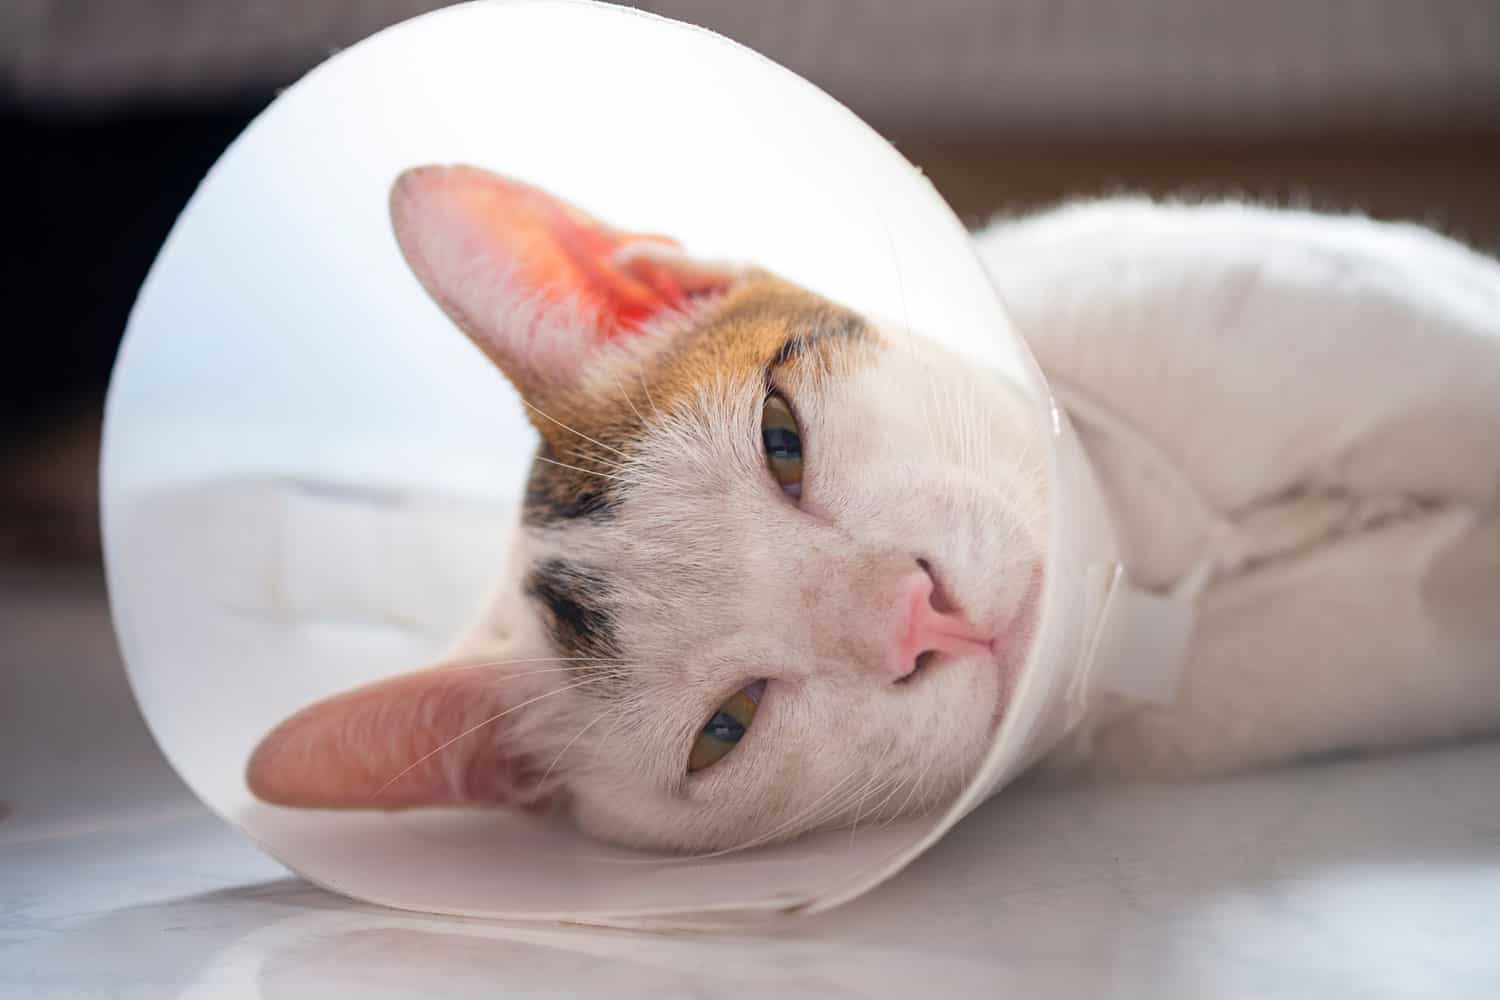 The cat wears a collar to prevent licking the wound after sterilization. Neutering the male cat. Sick cat concept.
